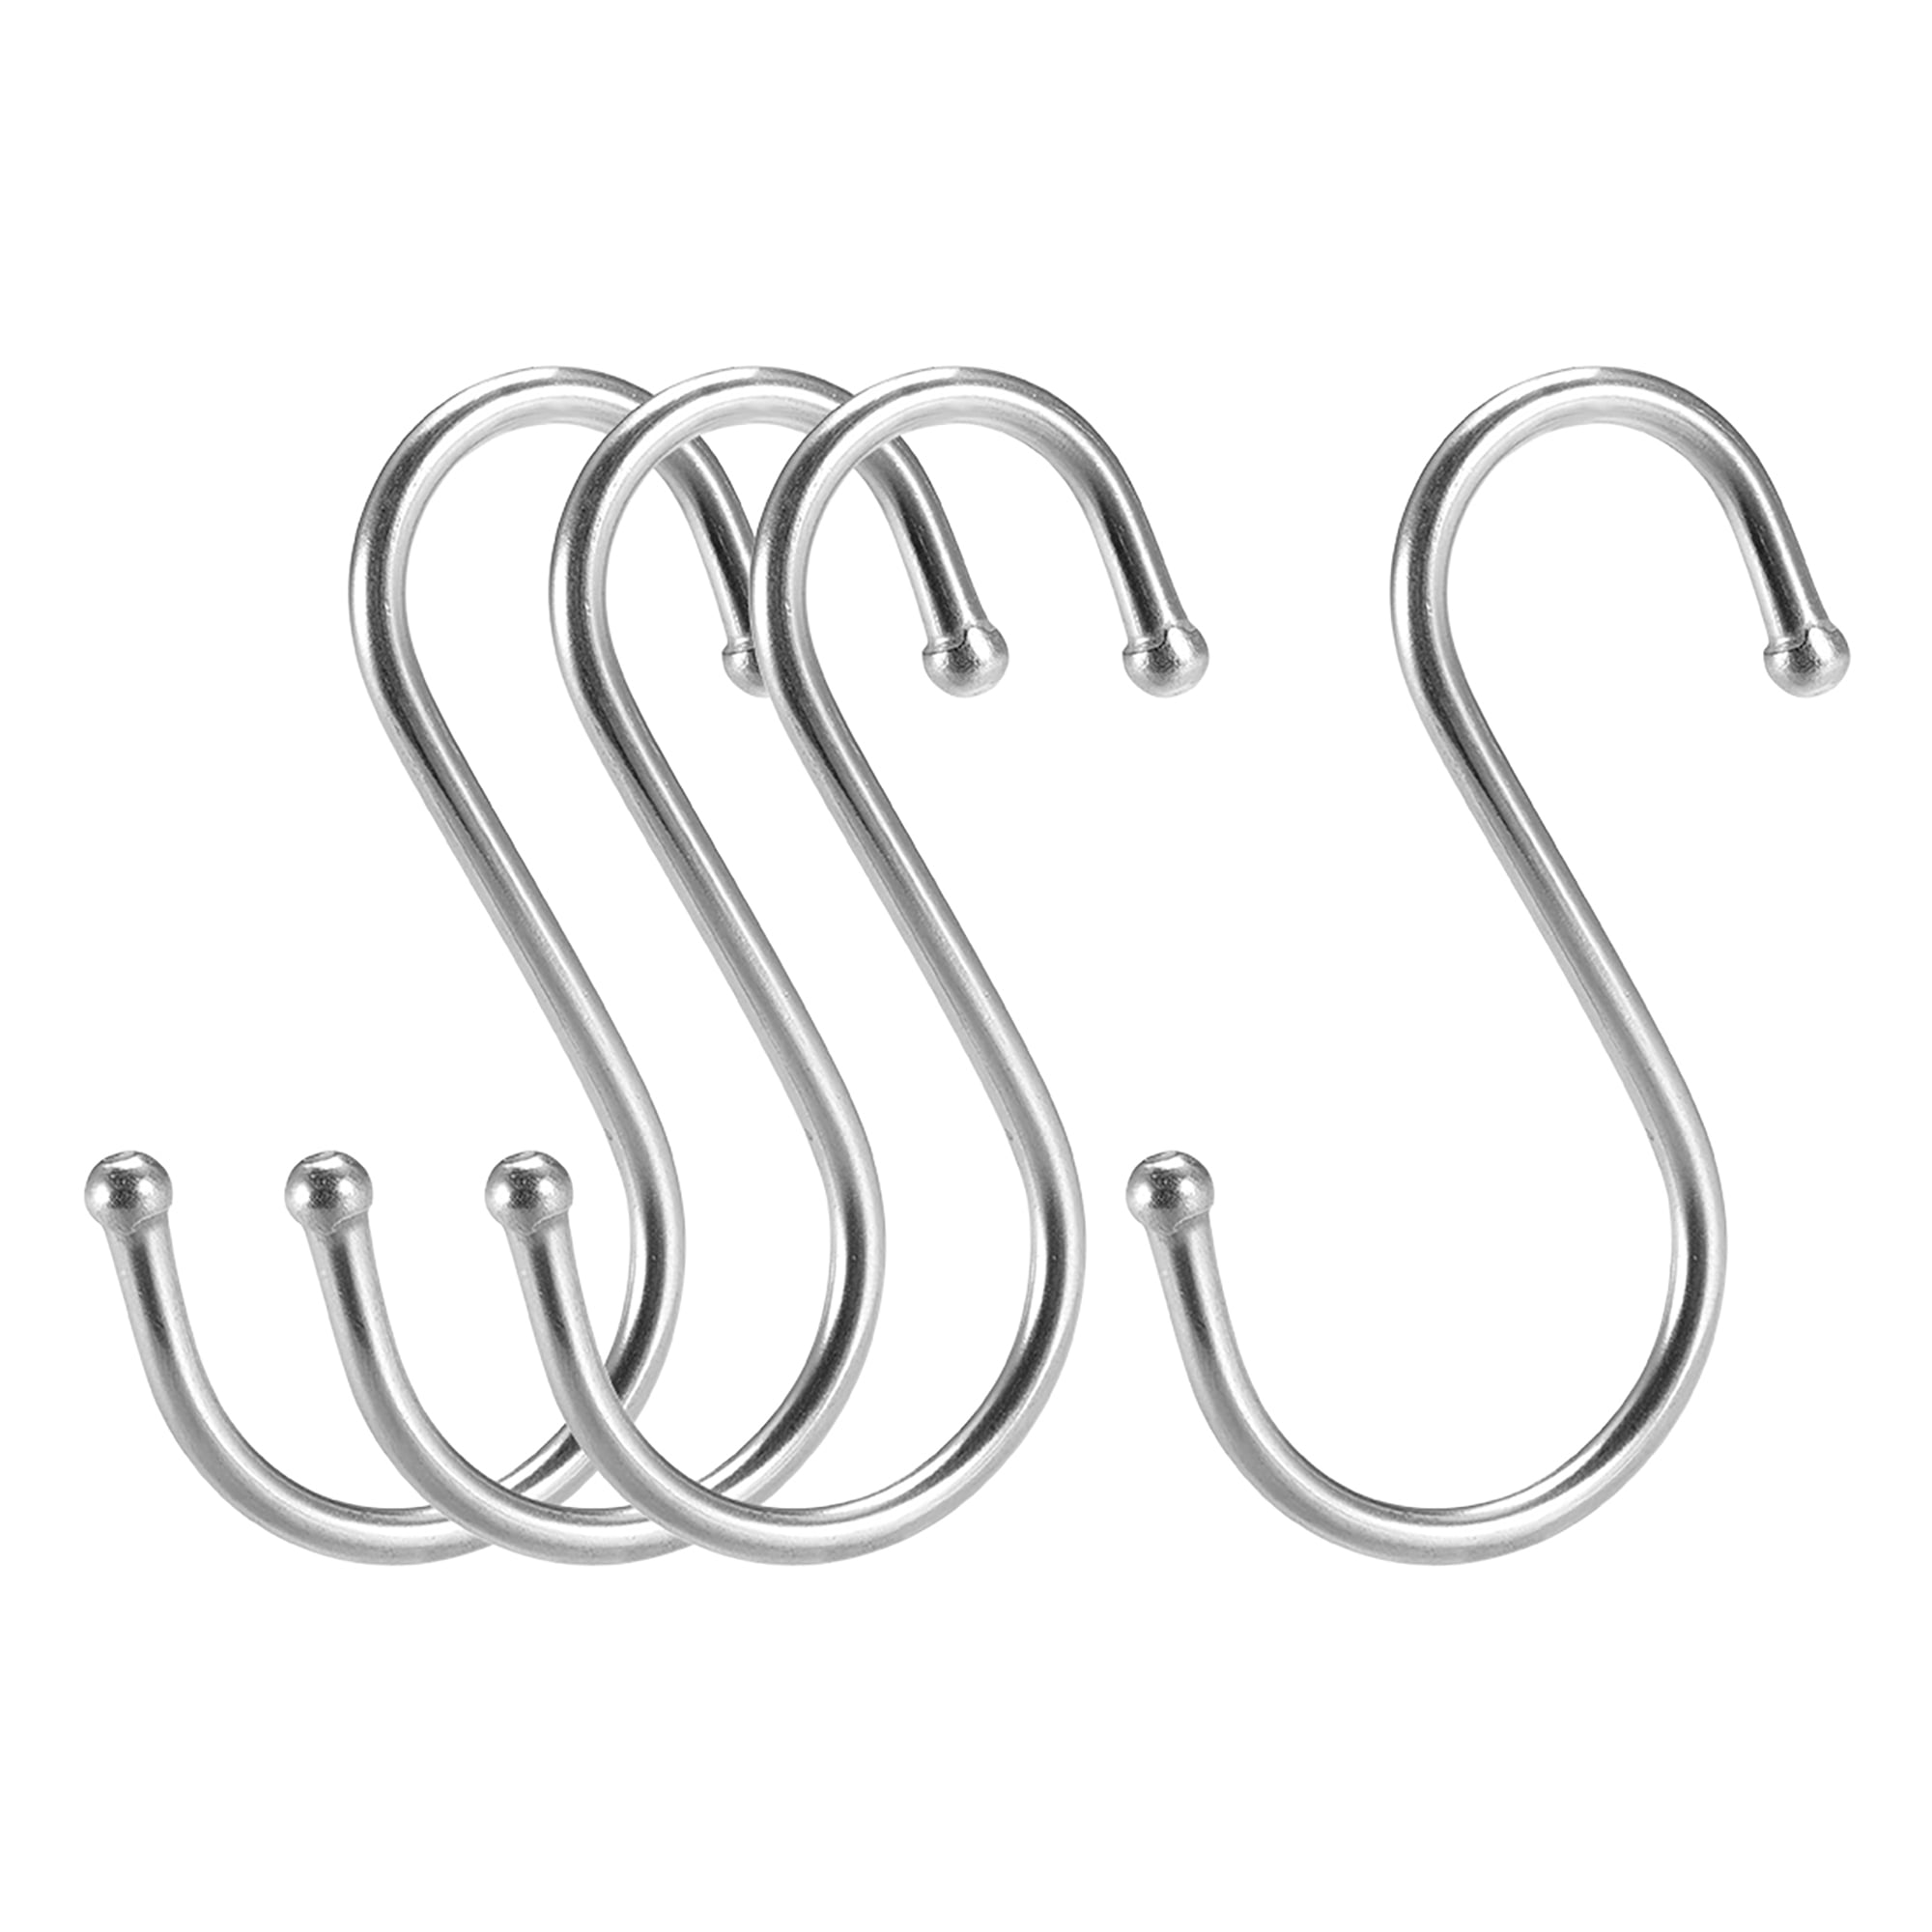 Pot Bedroom and Office: Pan Coat Bathroom 15 Pack/S Hook/Silver/2.4 Plants YourGift 15 Pack Heavy Duty S Hooks Black S Shaped Hooks Stainless Steel Hanging Hangers Hooks for Kitchen Bag 